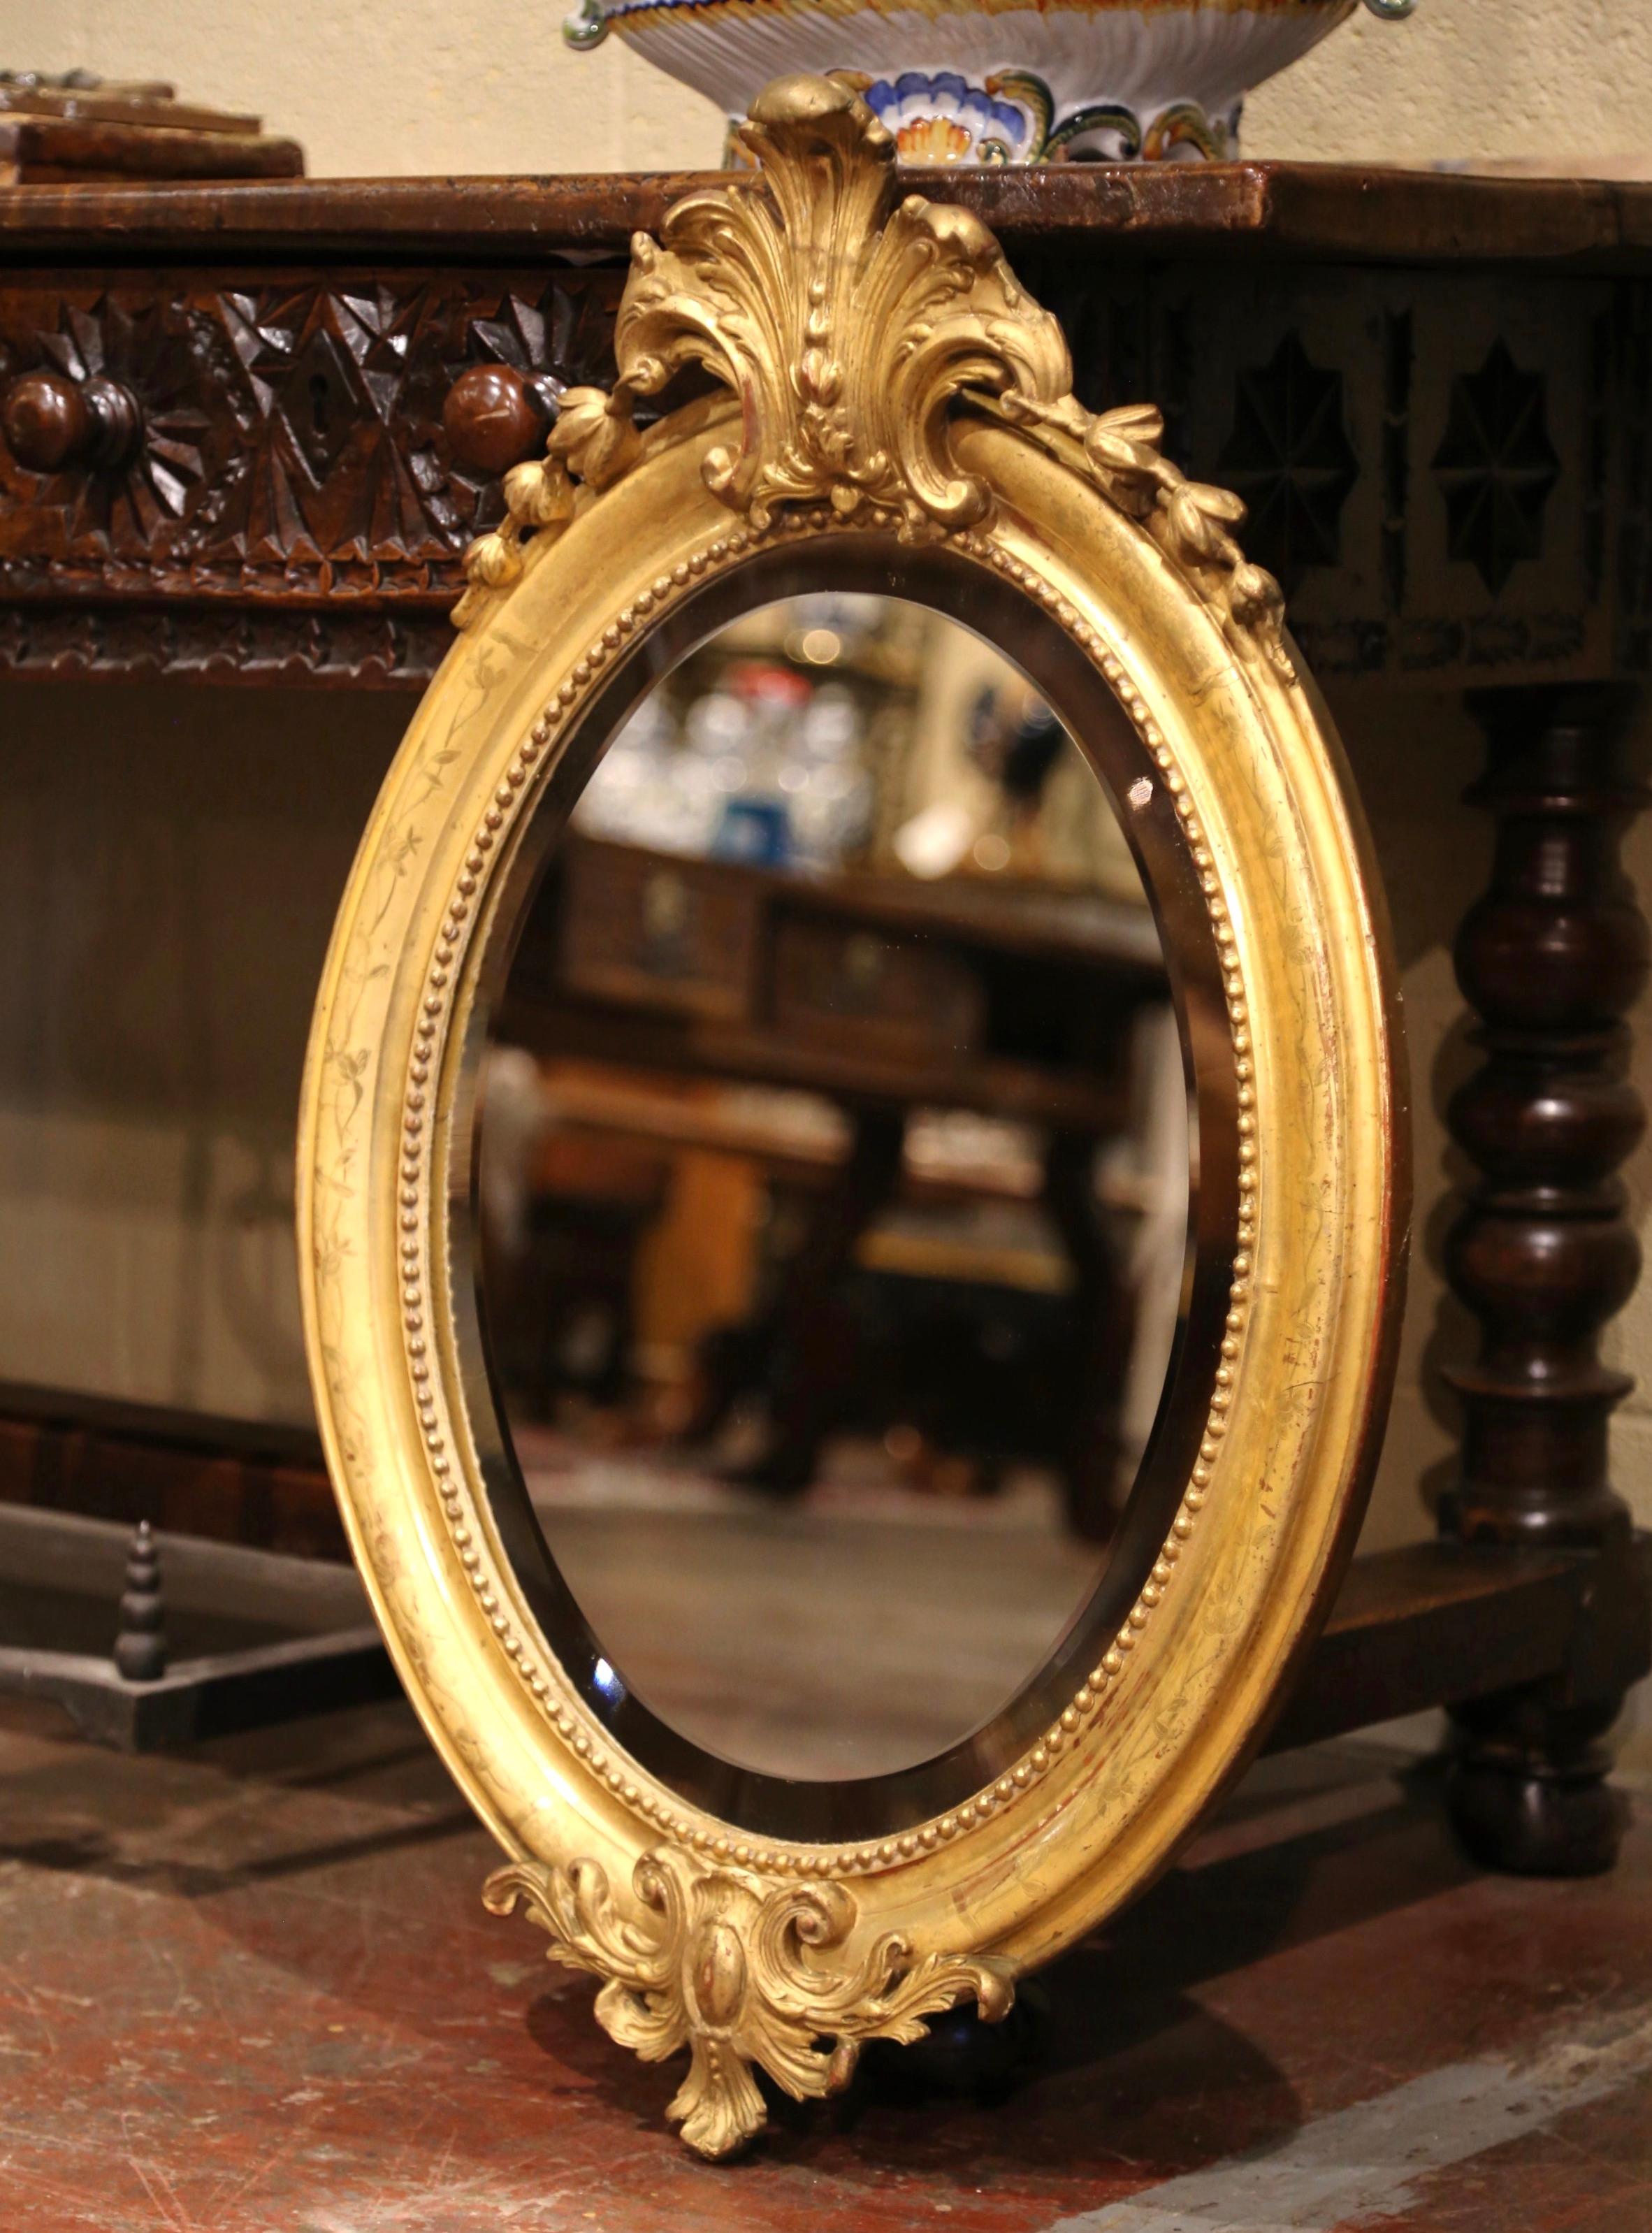 This elegant antique gilt mirror was created in France, circa 1870. Oval in shape, the mirror features a decorative shell cartouche flanked with foliage decor, discrete engraved floral motifs around the frame and another intricate shell motif in